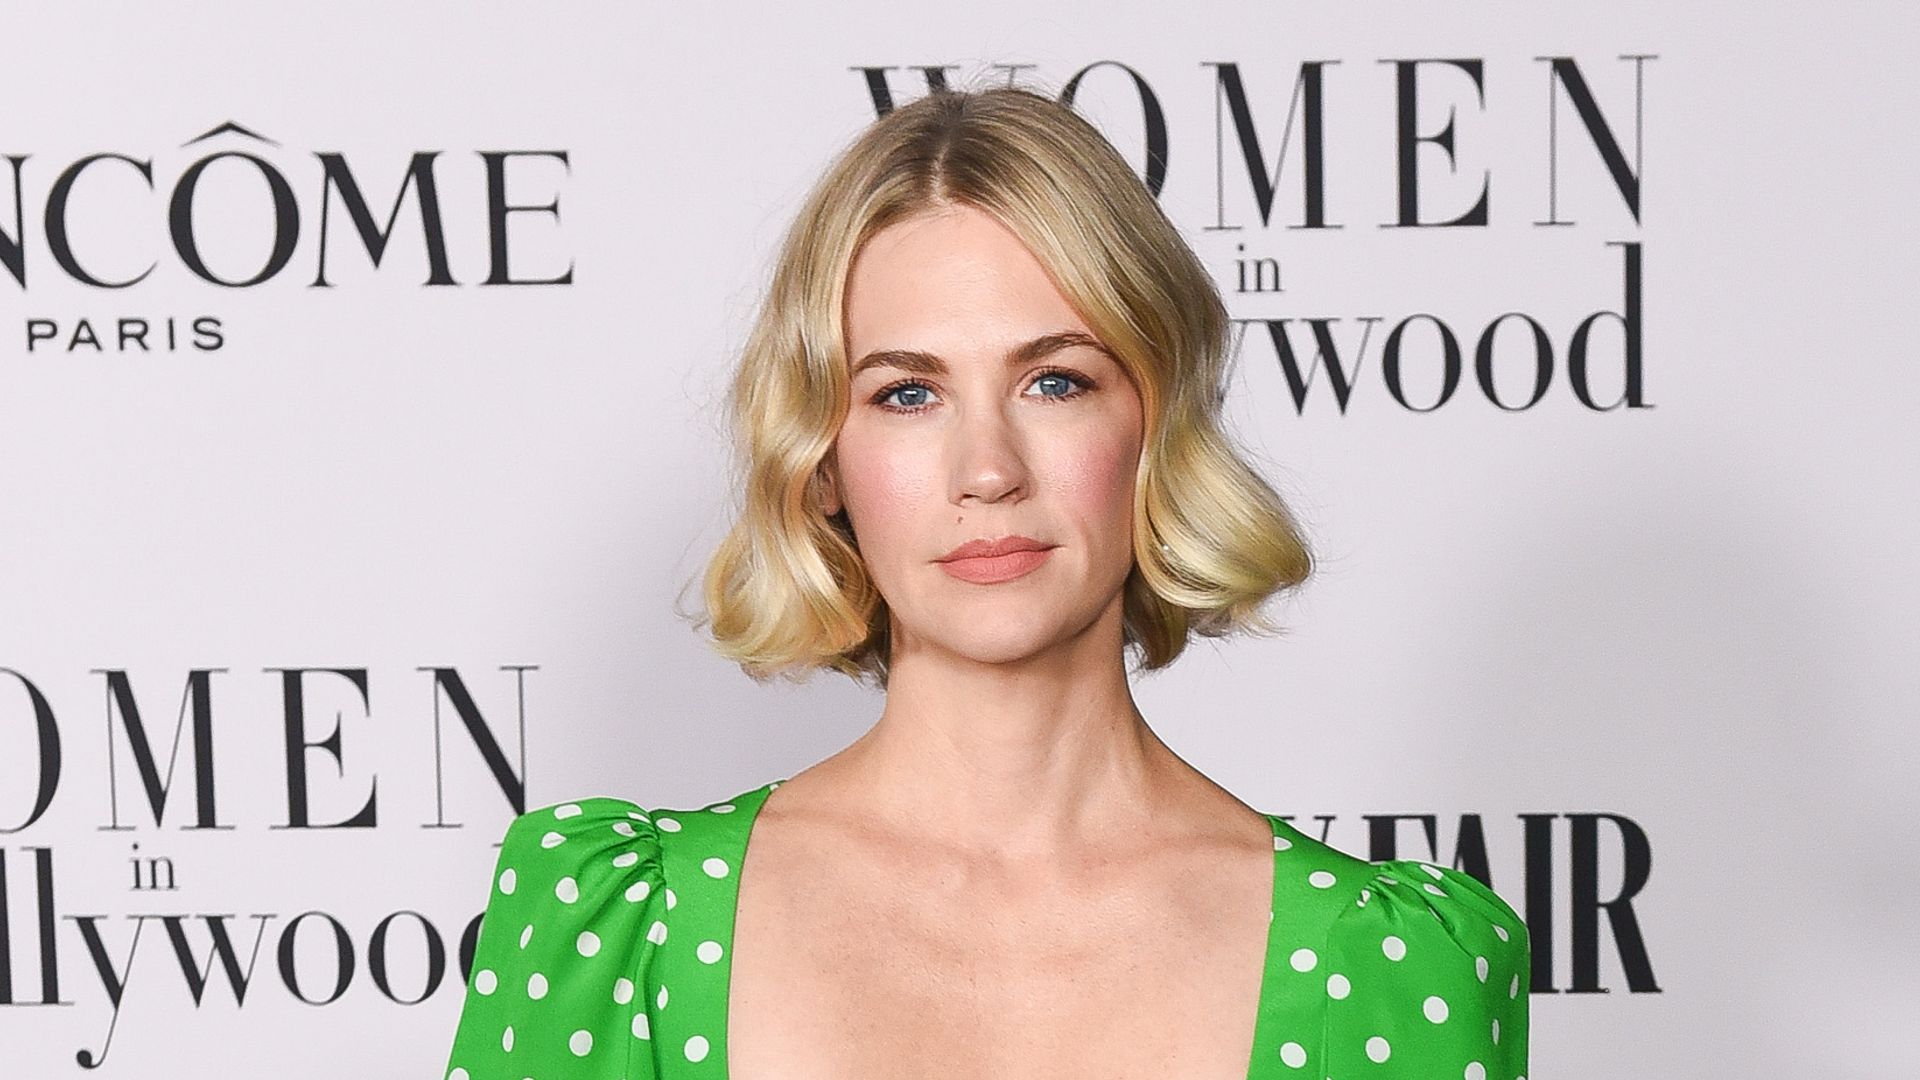 January Jones attends the Vanity Fair and LancÃ´me Women in Hollywood celebration at Soho House on February 06, 2020 in West Hollywood, California